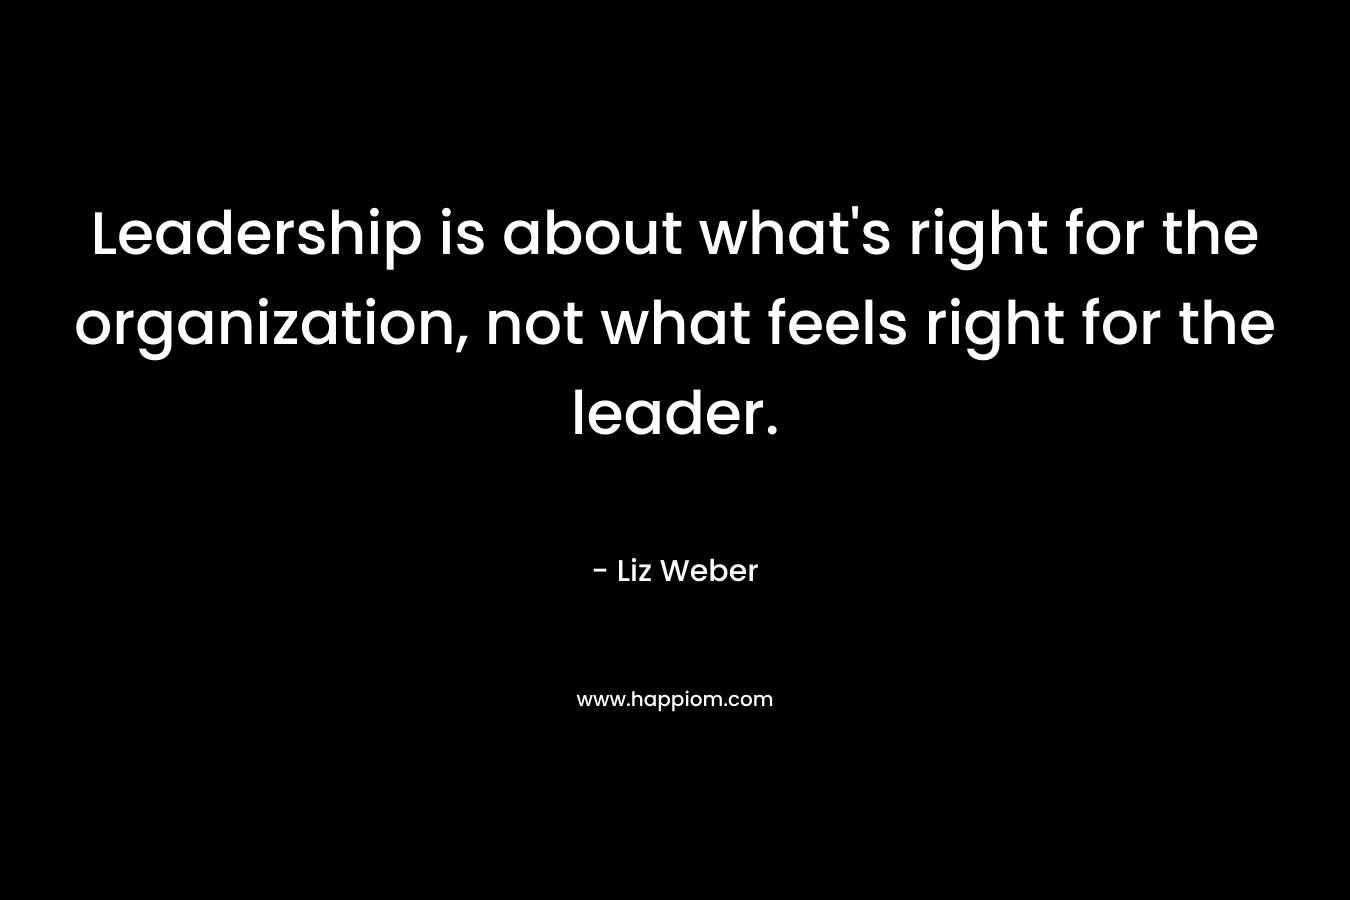 Leadership is about what's right for the organization, not what feels right for the leader.